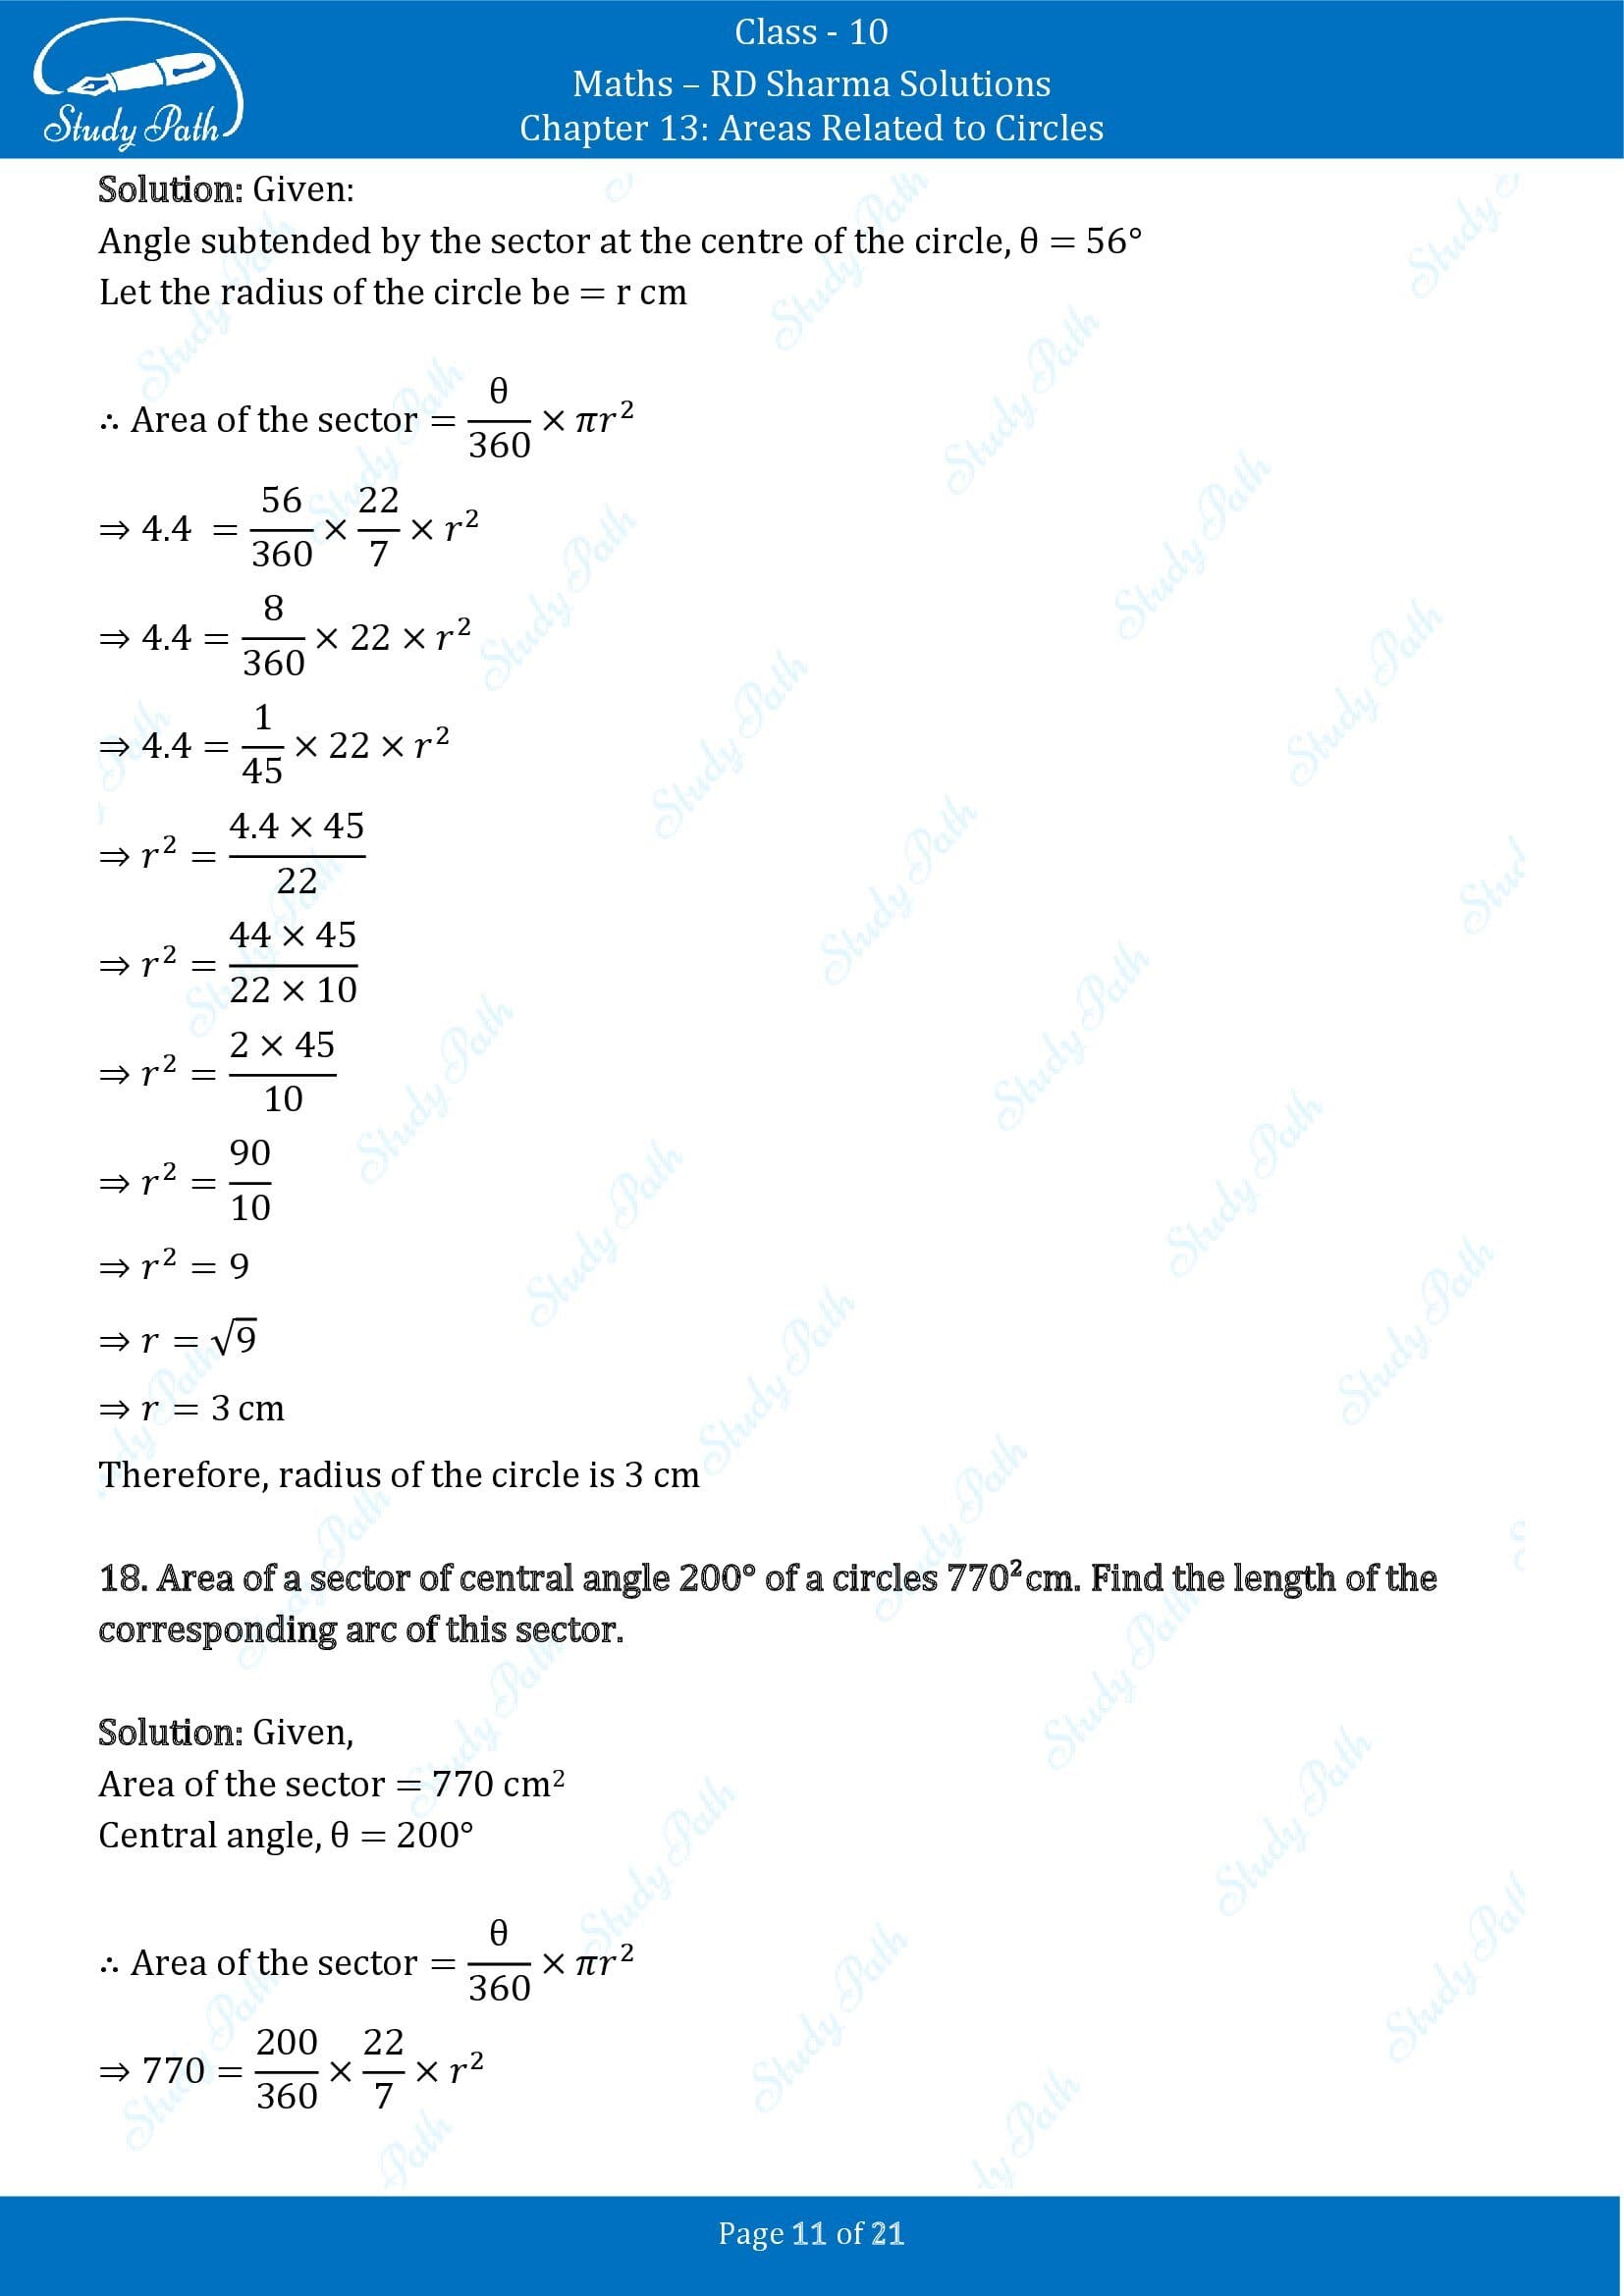 RD Sharma Solutions Class 10 Chapter 13 Areas Related to Circles Exercise 13.2 00011